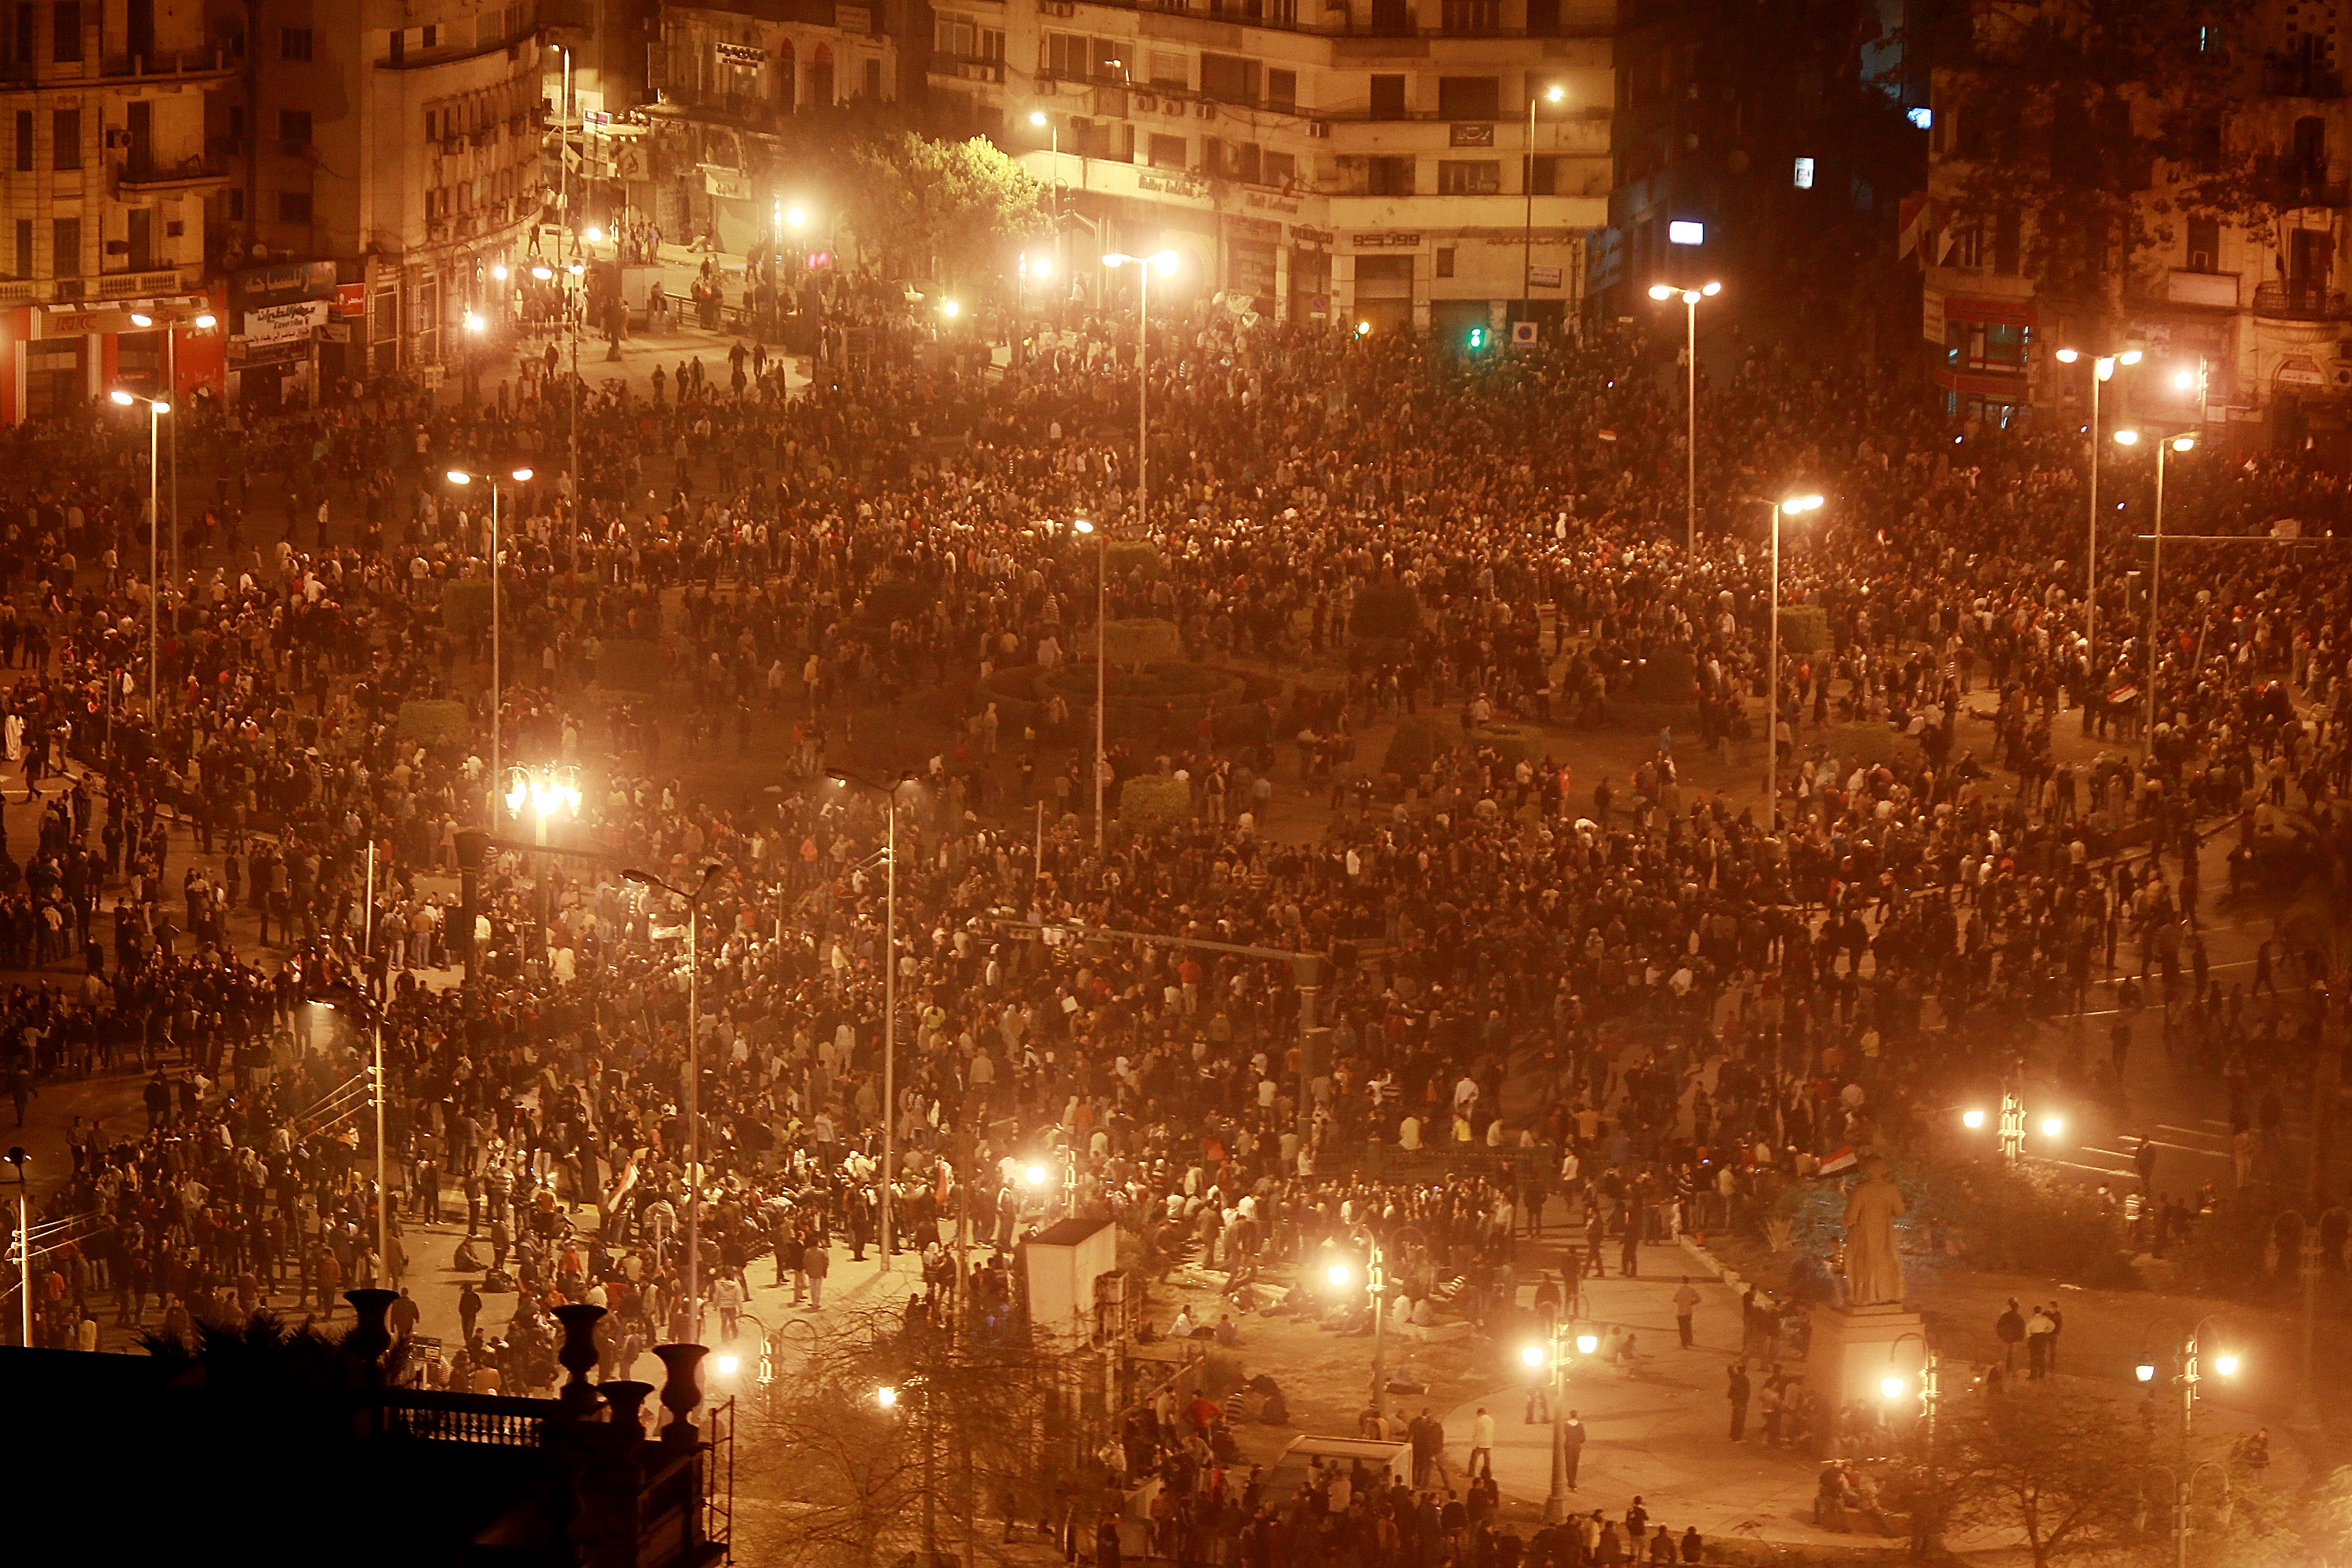 Thousands of protestors gathered in Tahrir Square on Jan. 28, 2011 in Cairo, Egypt. Thousands of police were on the streets of the capital and hundreds of arrests were made in an attempt to quell demonstrations. (Peter Macdiarmid—Getty Images)